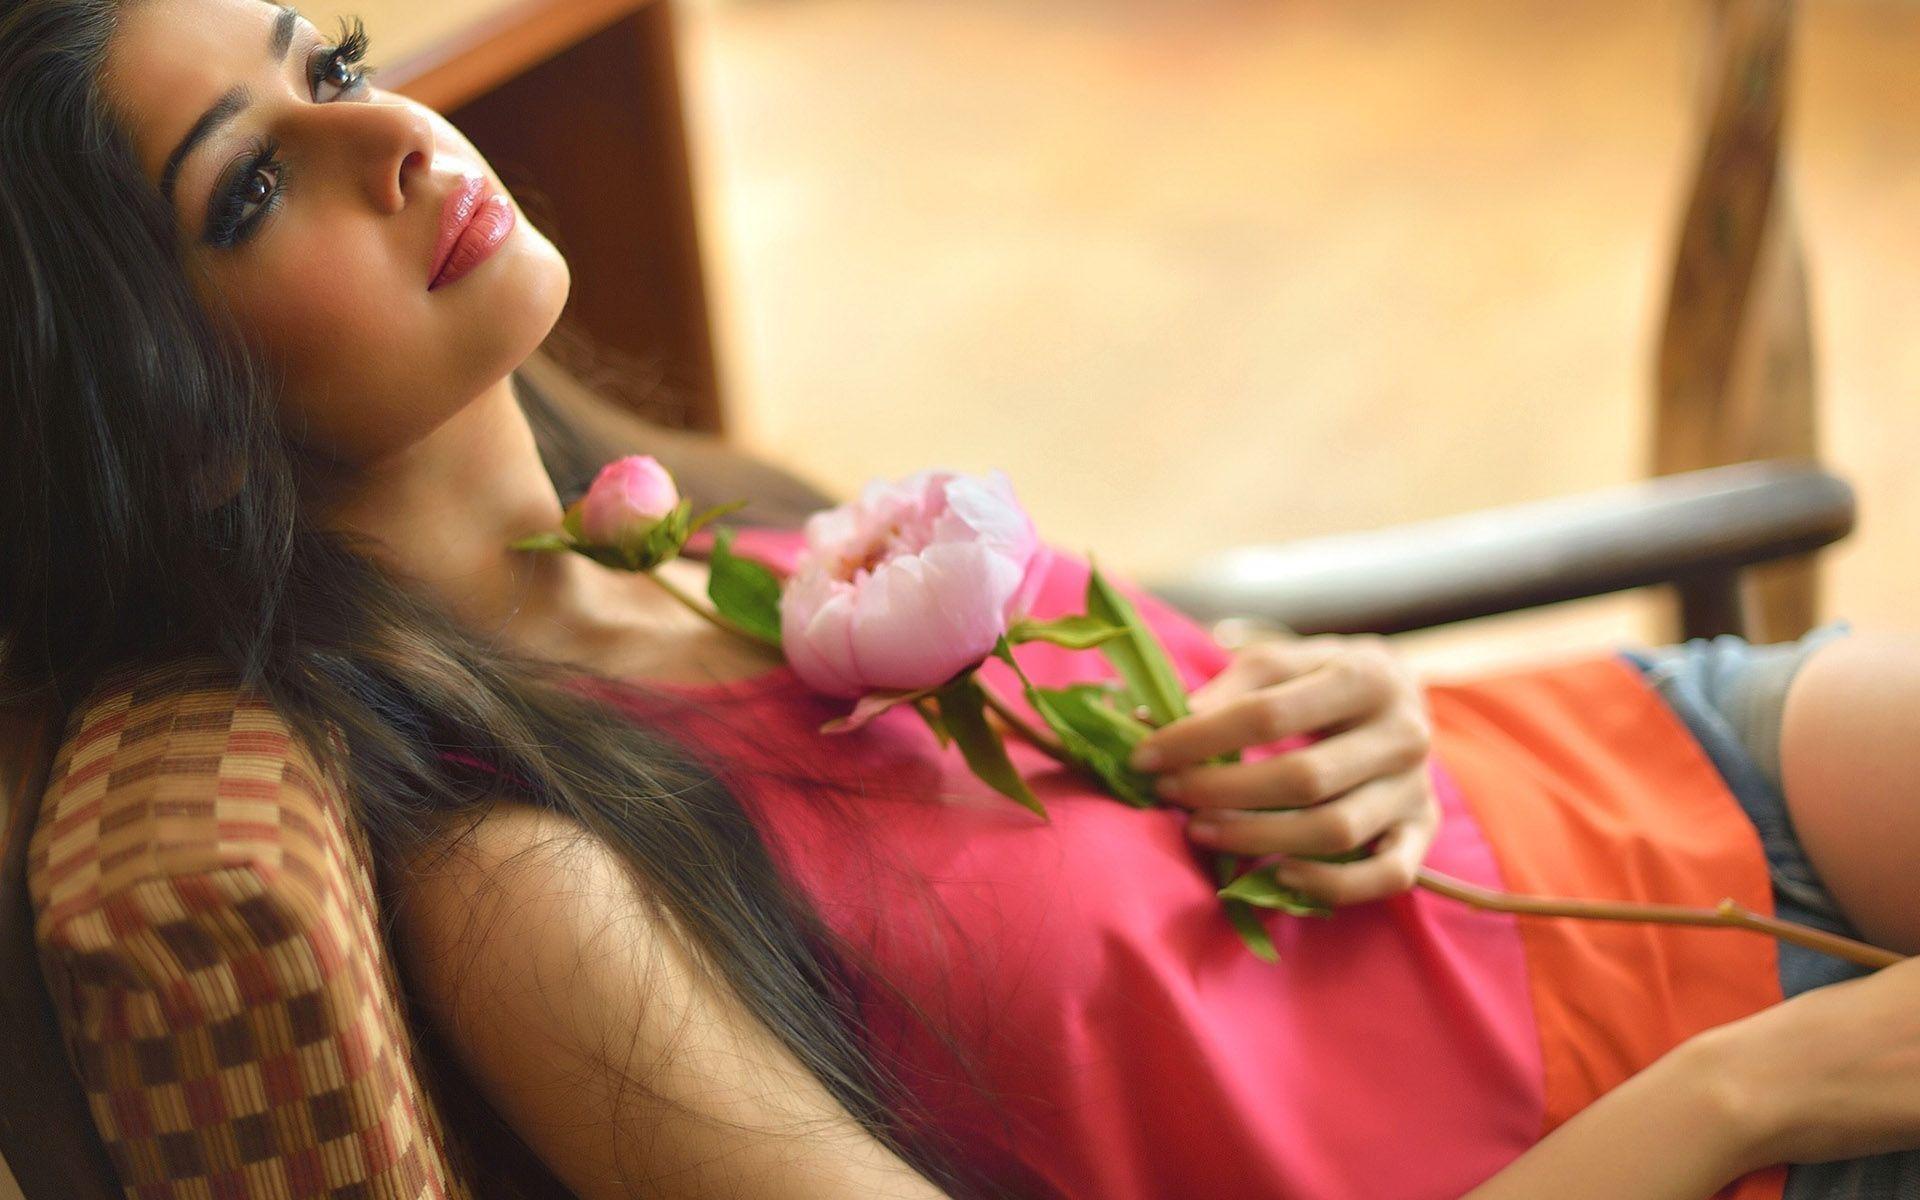 HD Indian girl holding a rose Wallpaper